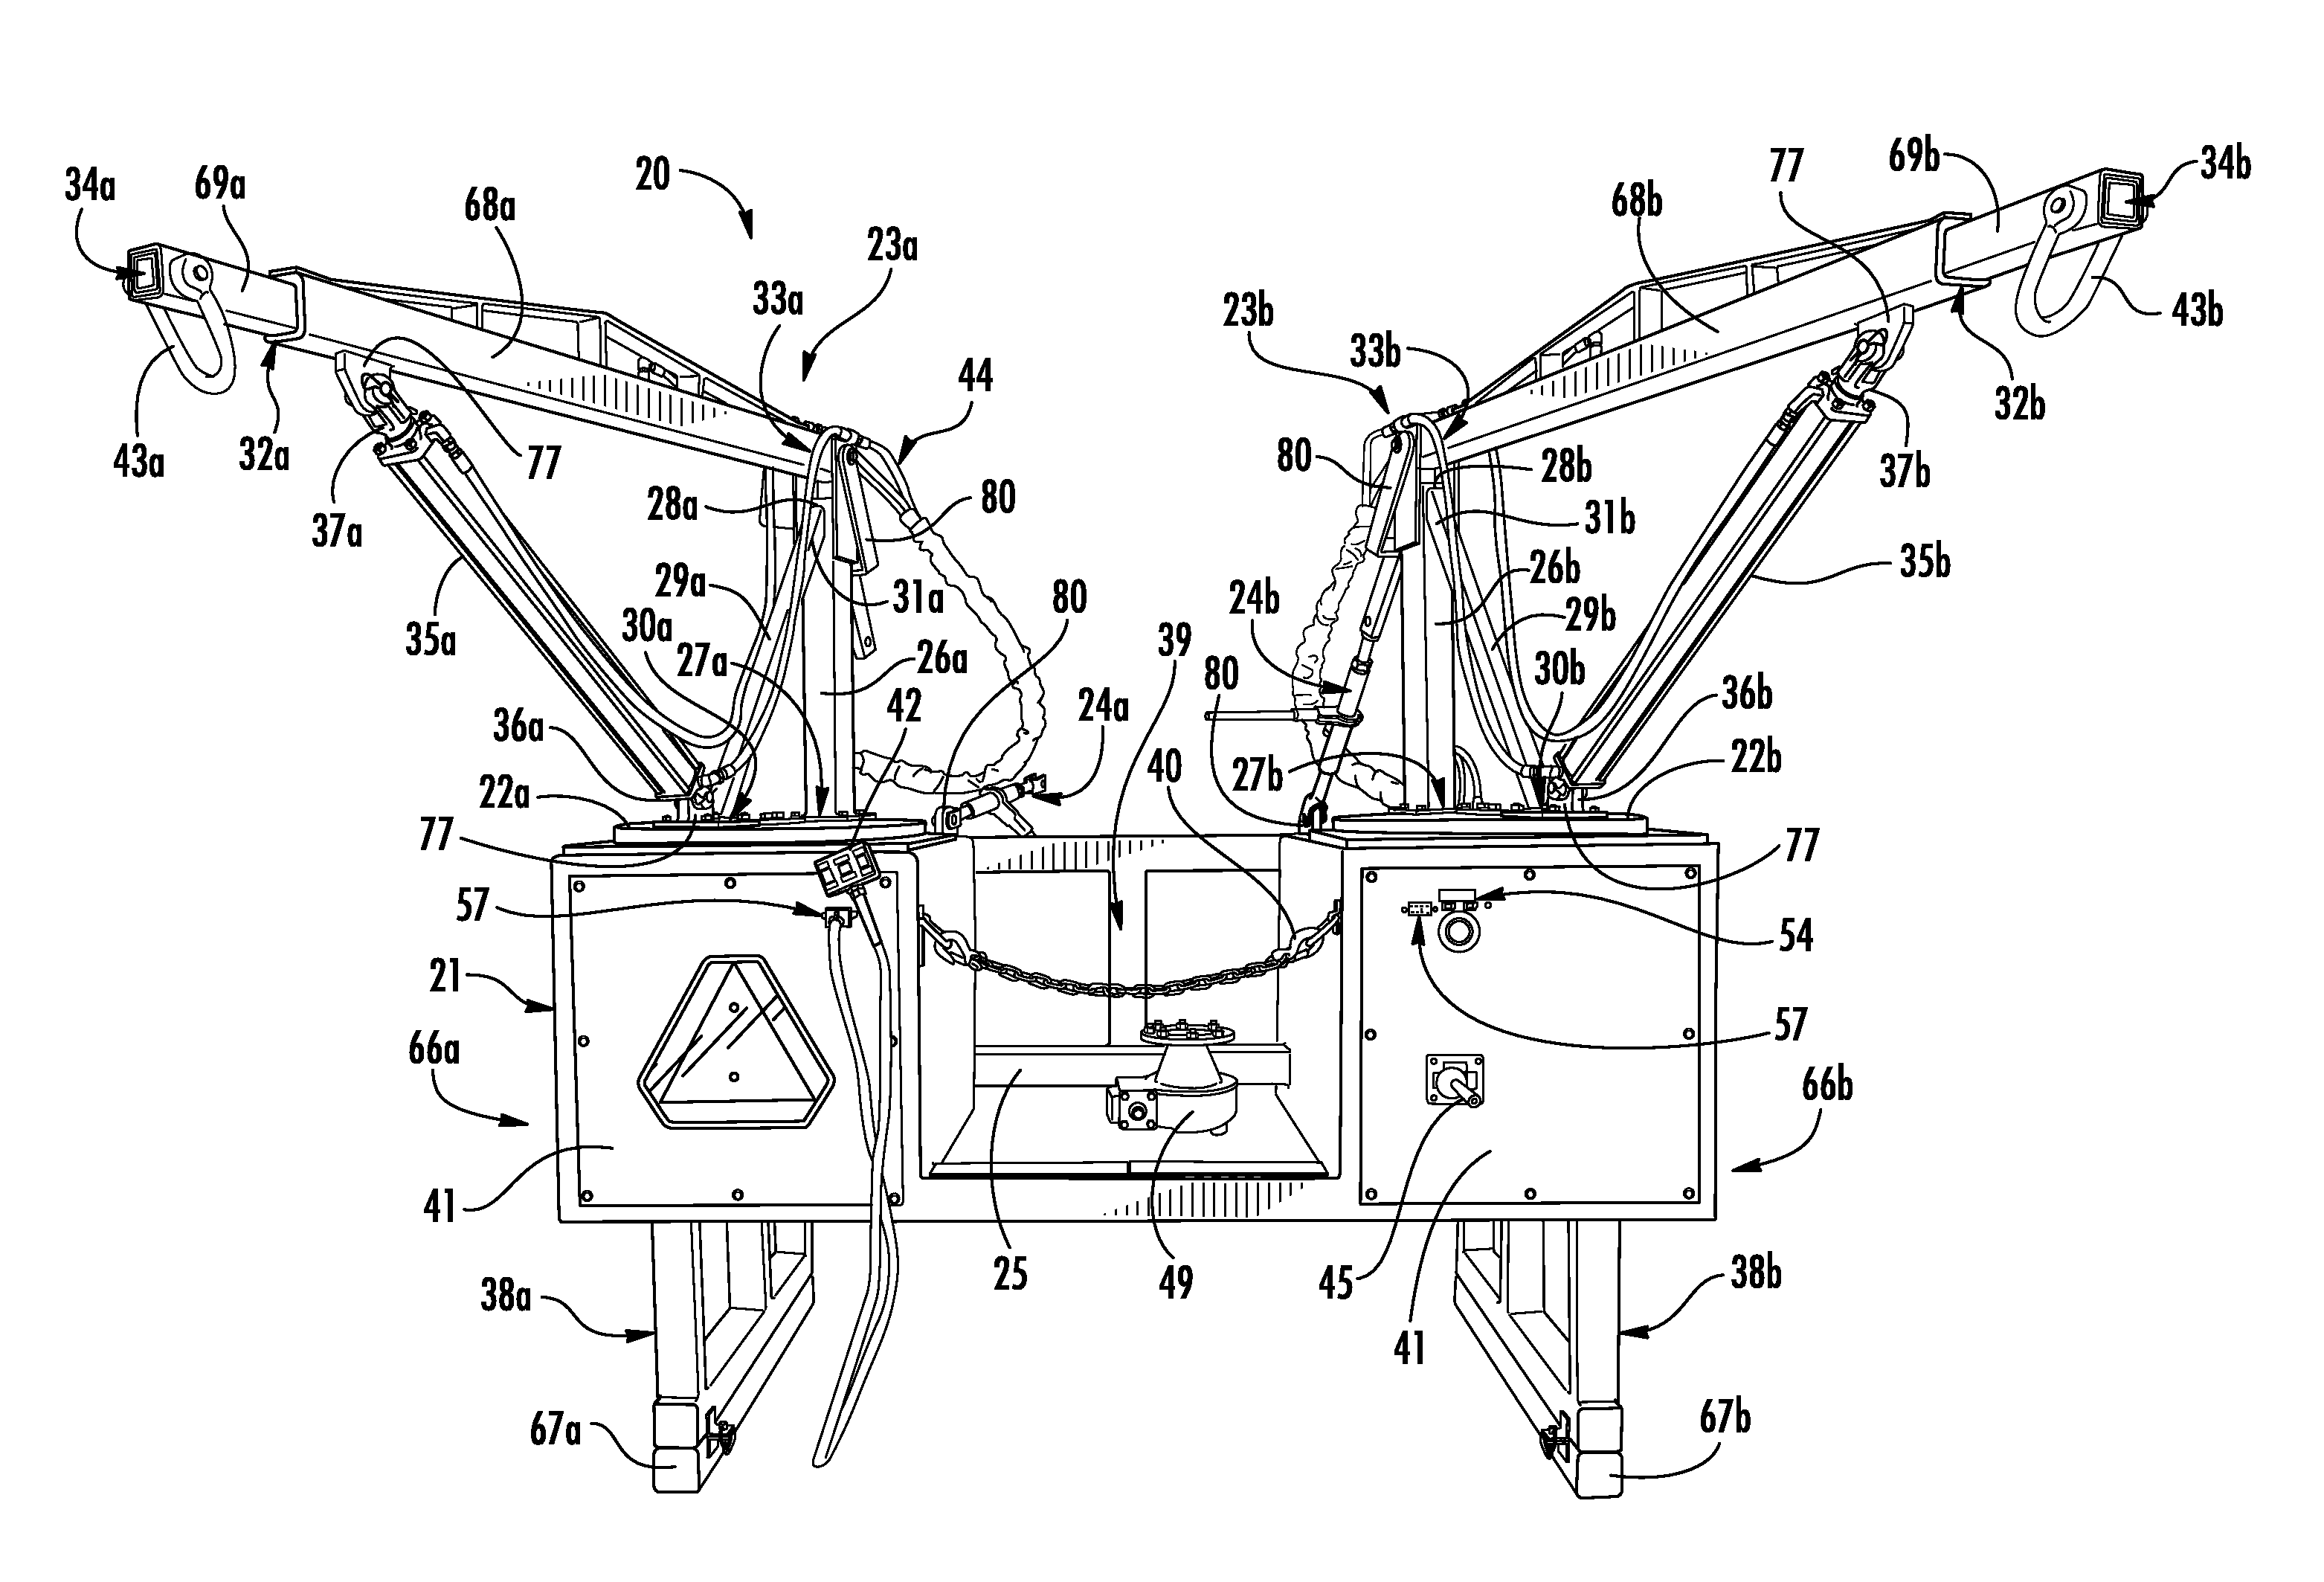 Dual crane apparatus and method of use